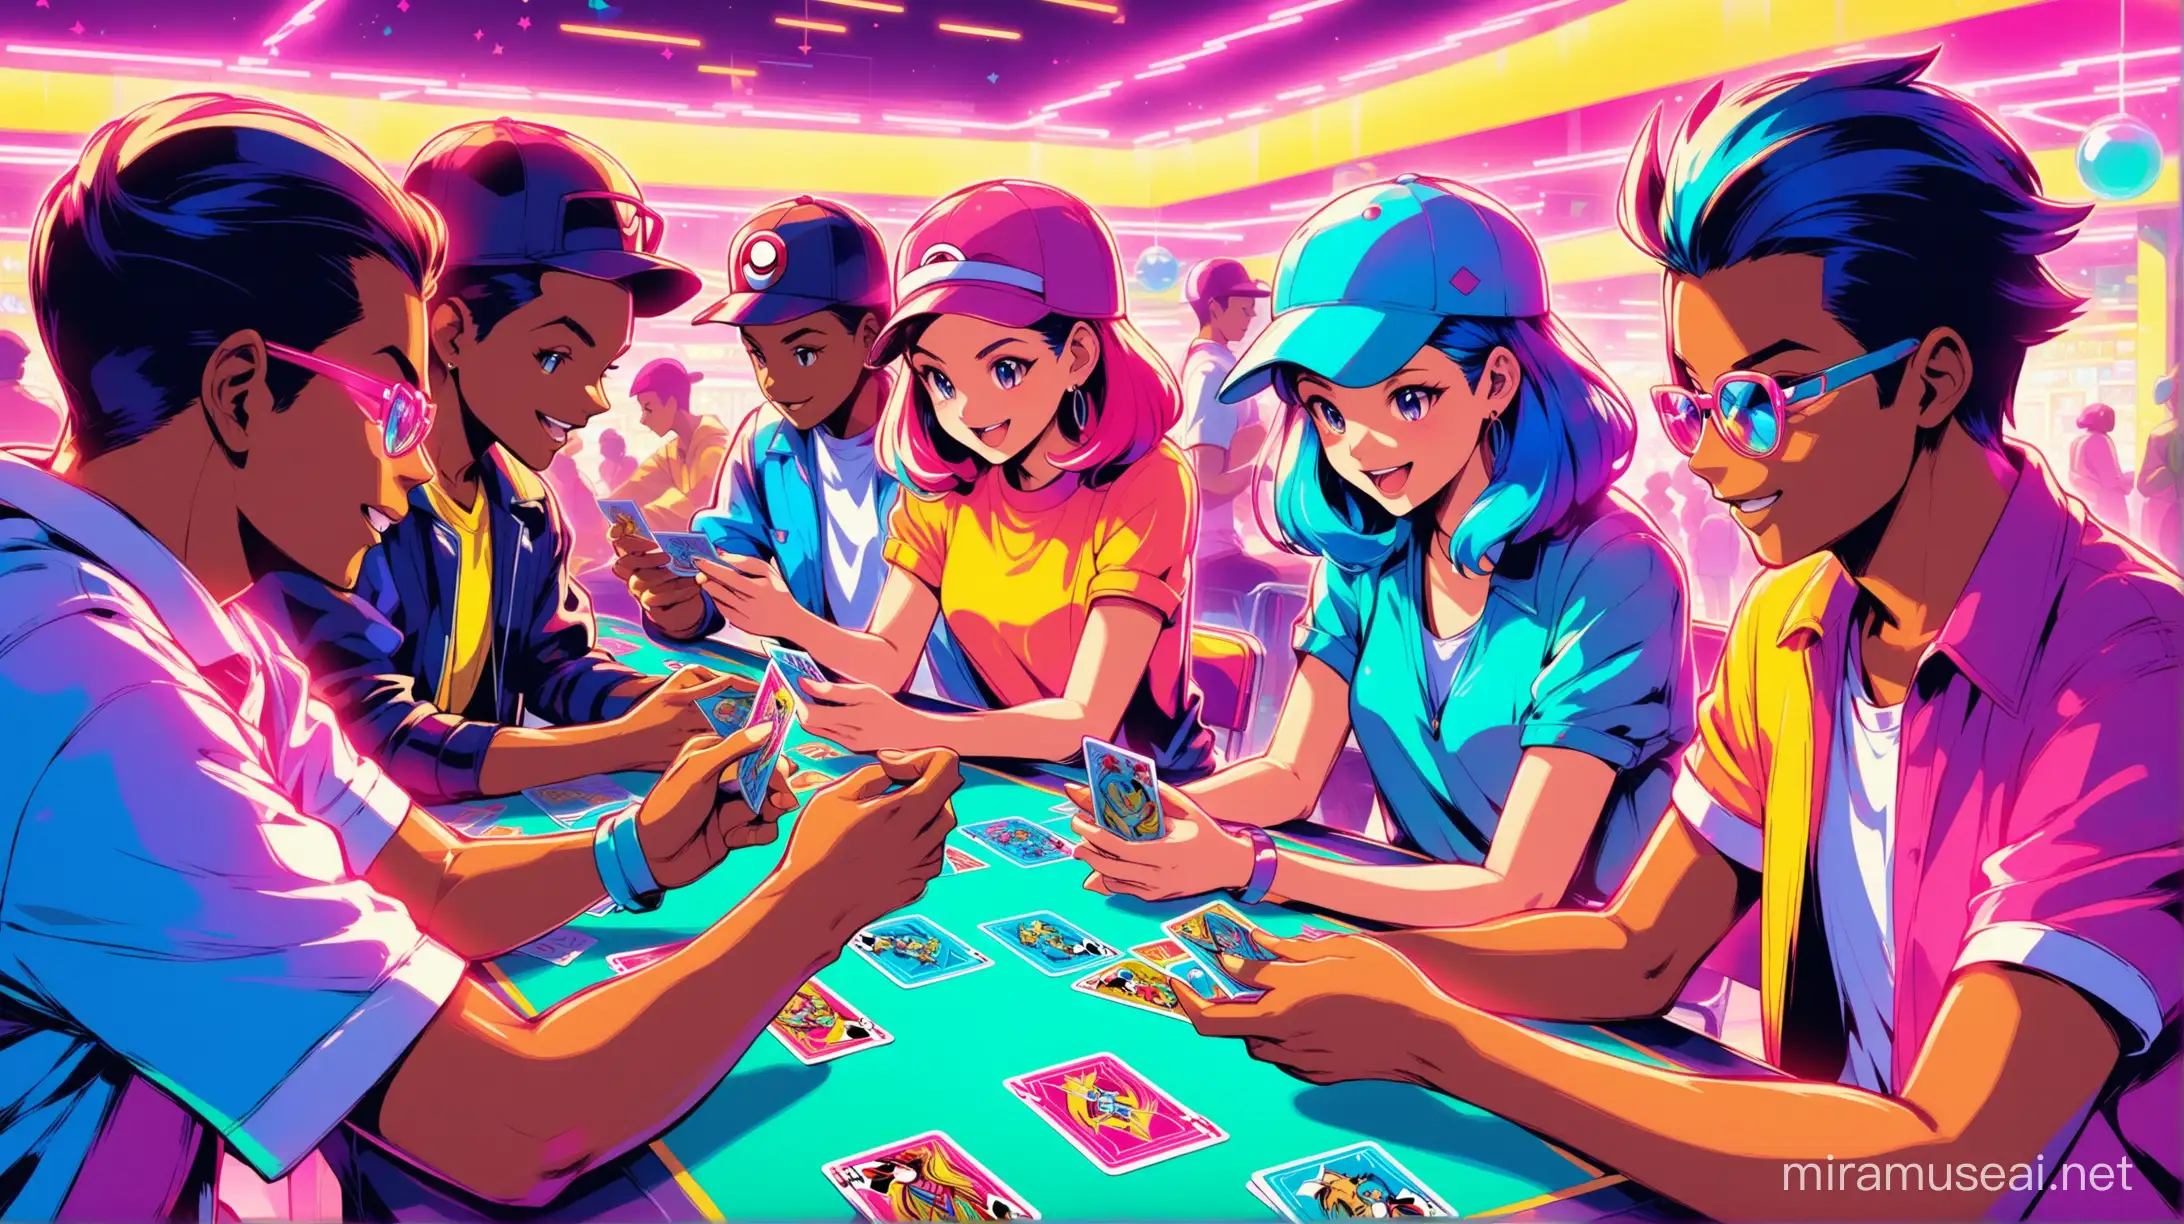 People playing pokemon cards. Vibrant colors. Neon and Retro vibes.